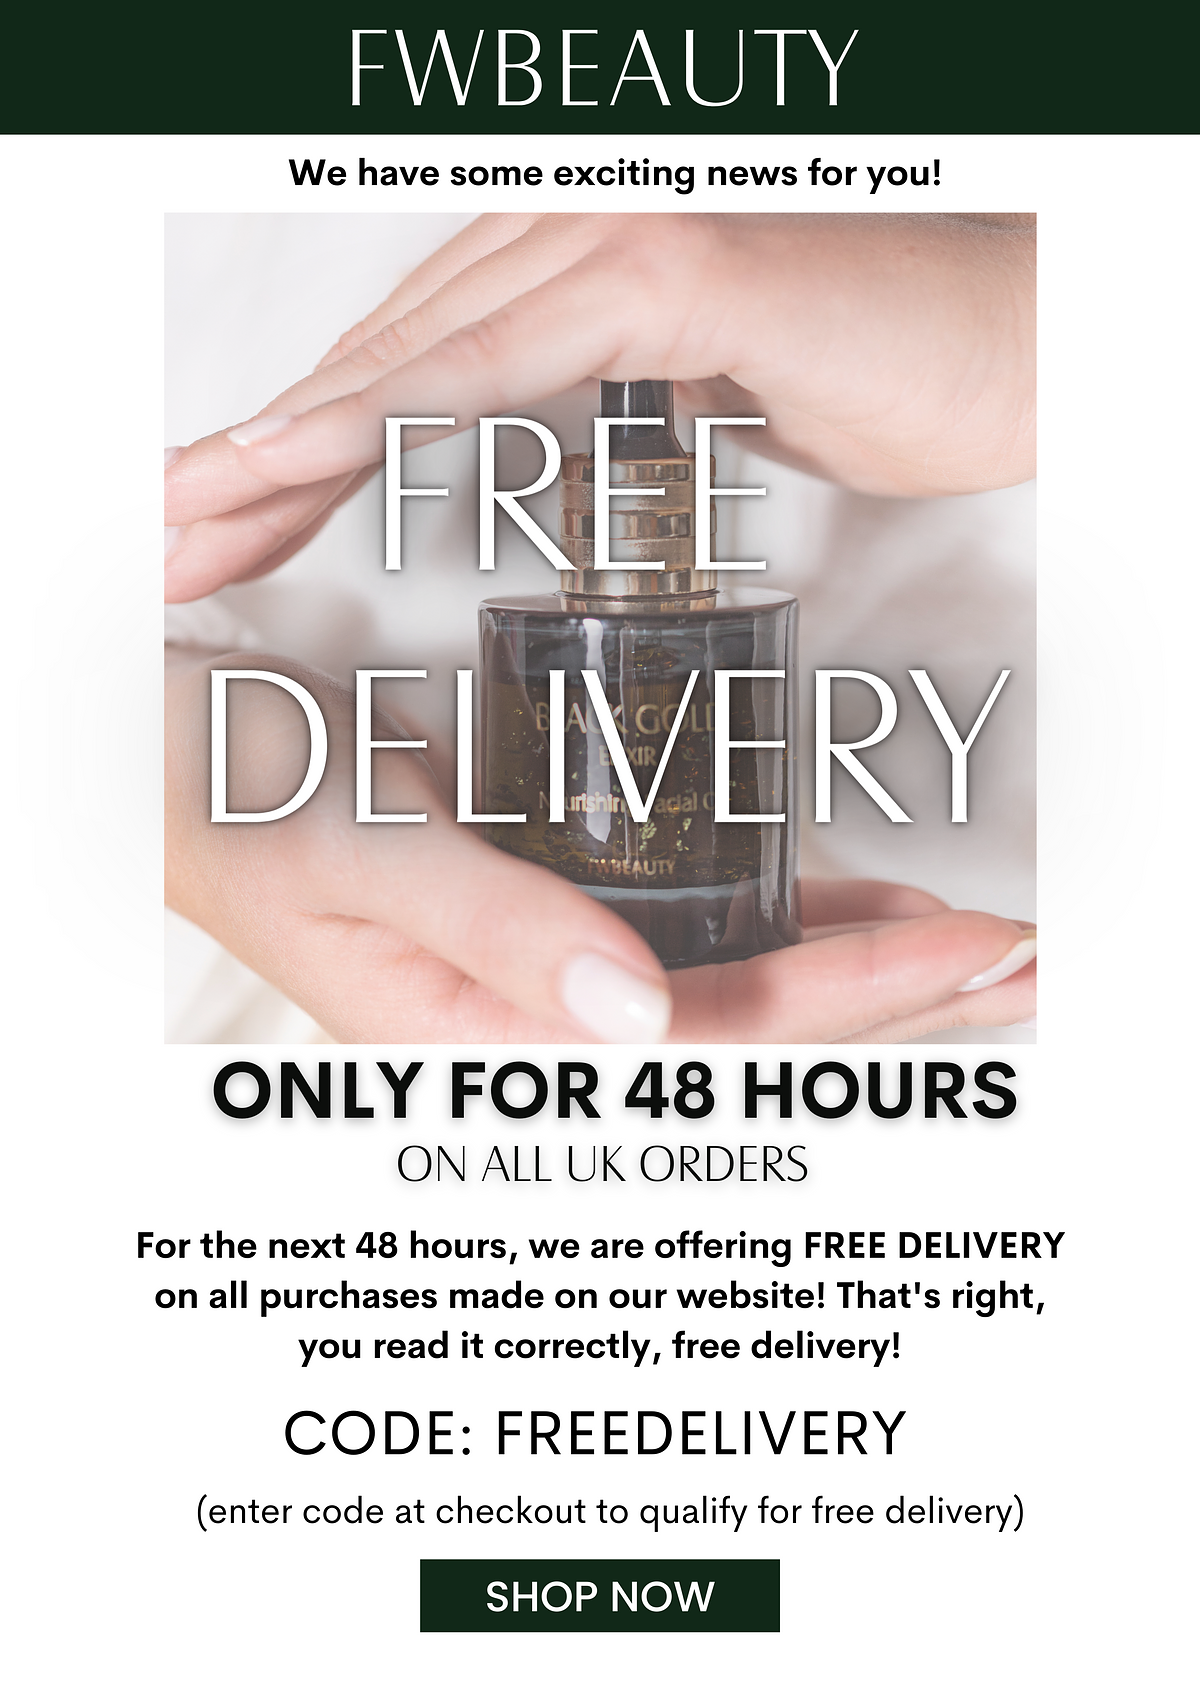 FWBEAUTY We have some exciting news for you! ONLY FOR 48 HOURS ON ALL UK ORDERS For the next 48 hours, we are offering FREE DELIVERY on all purchases made on our website! That's right, you read it correctly, free delivery! CODE: FREEDELIVERY enter code at checkout to qualify for free delivery SHOP NOW 